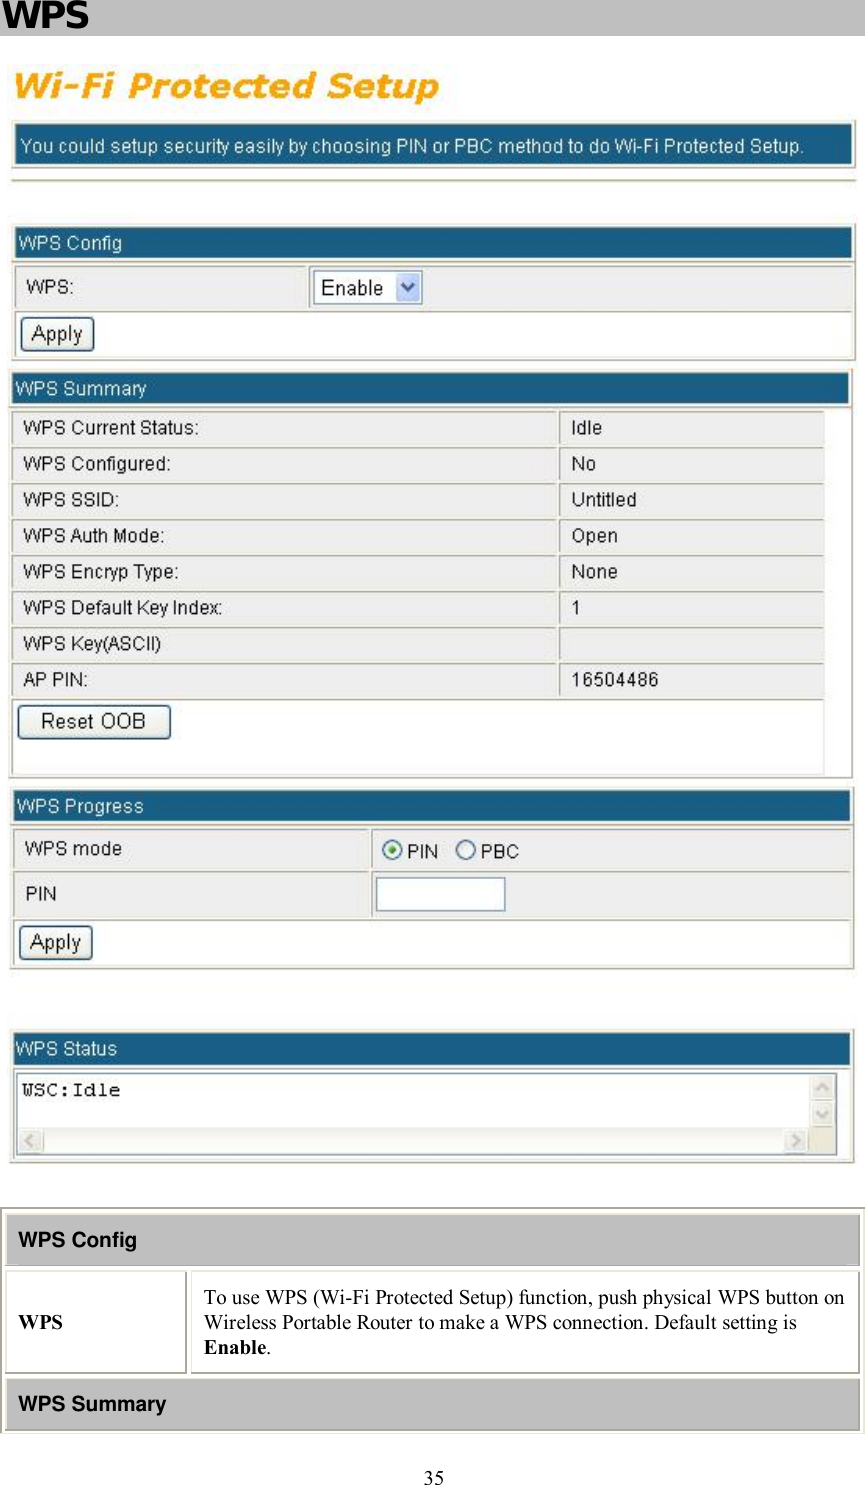    35 WPS   WPS Config WPS To use WPS (Wi-Fi Protected Setup) function, push physical WPS button on Wireless Portable Router to make a WPS connection. Default setting is Enable. WPS Summary 